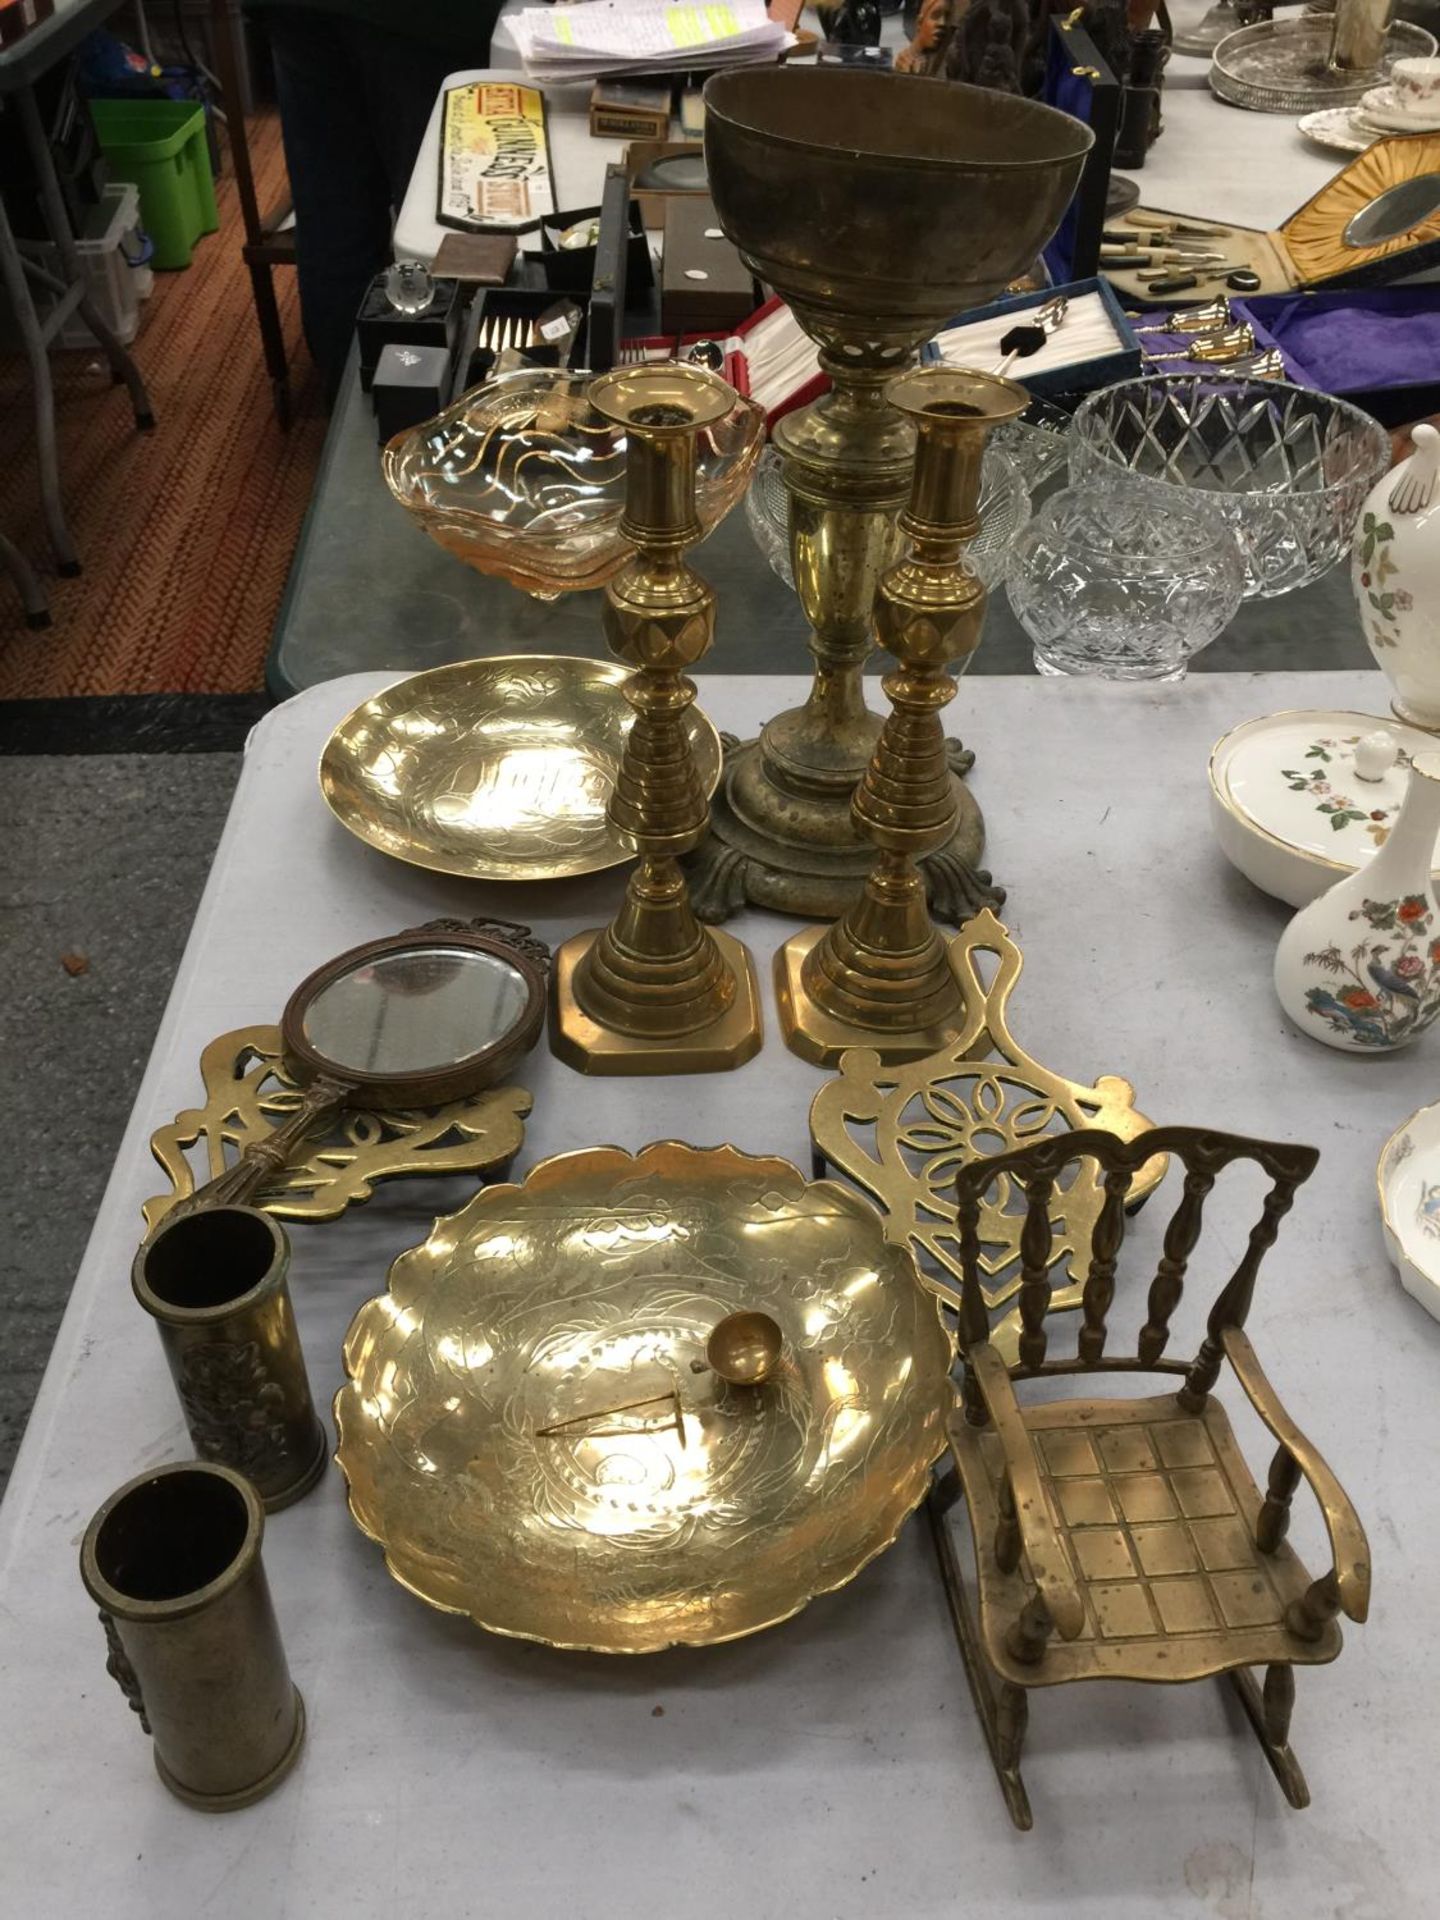 A QUANTITY OF BRASSWARE TO INCLUDE A PLANT HOLDER, CANDLESTICKS, TRIVETS, BOWLS, ETC - Image 2 of 9